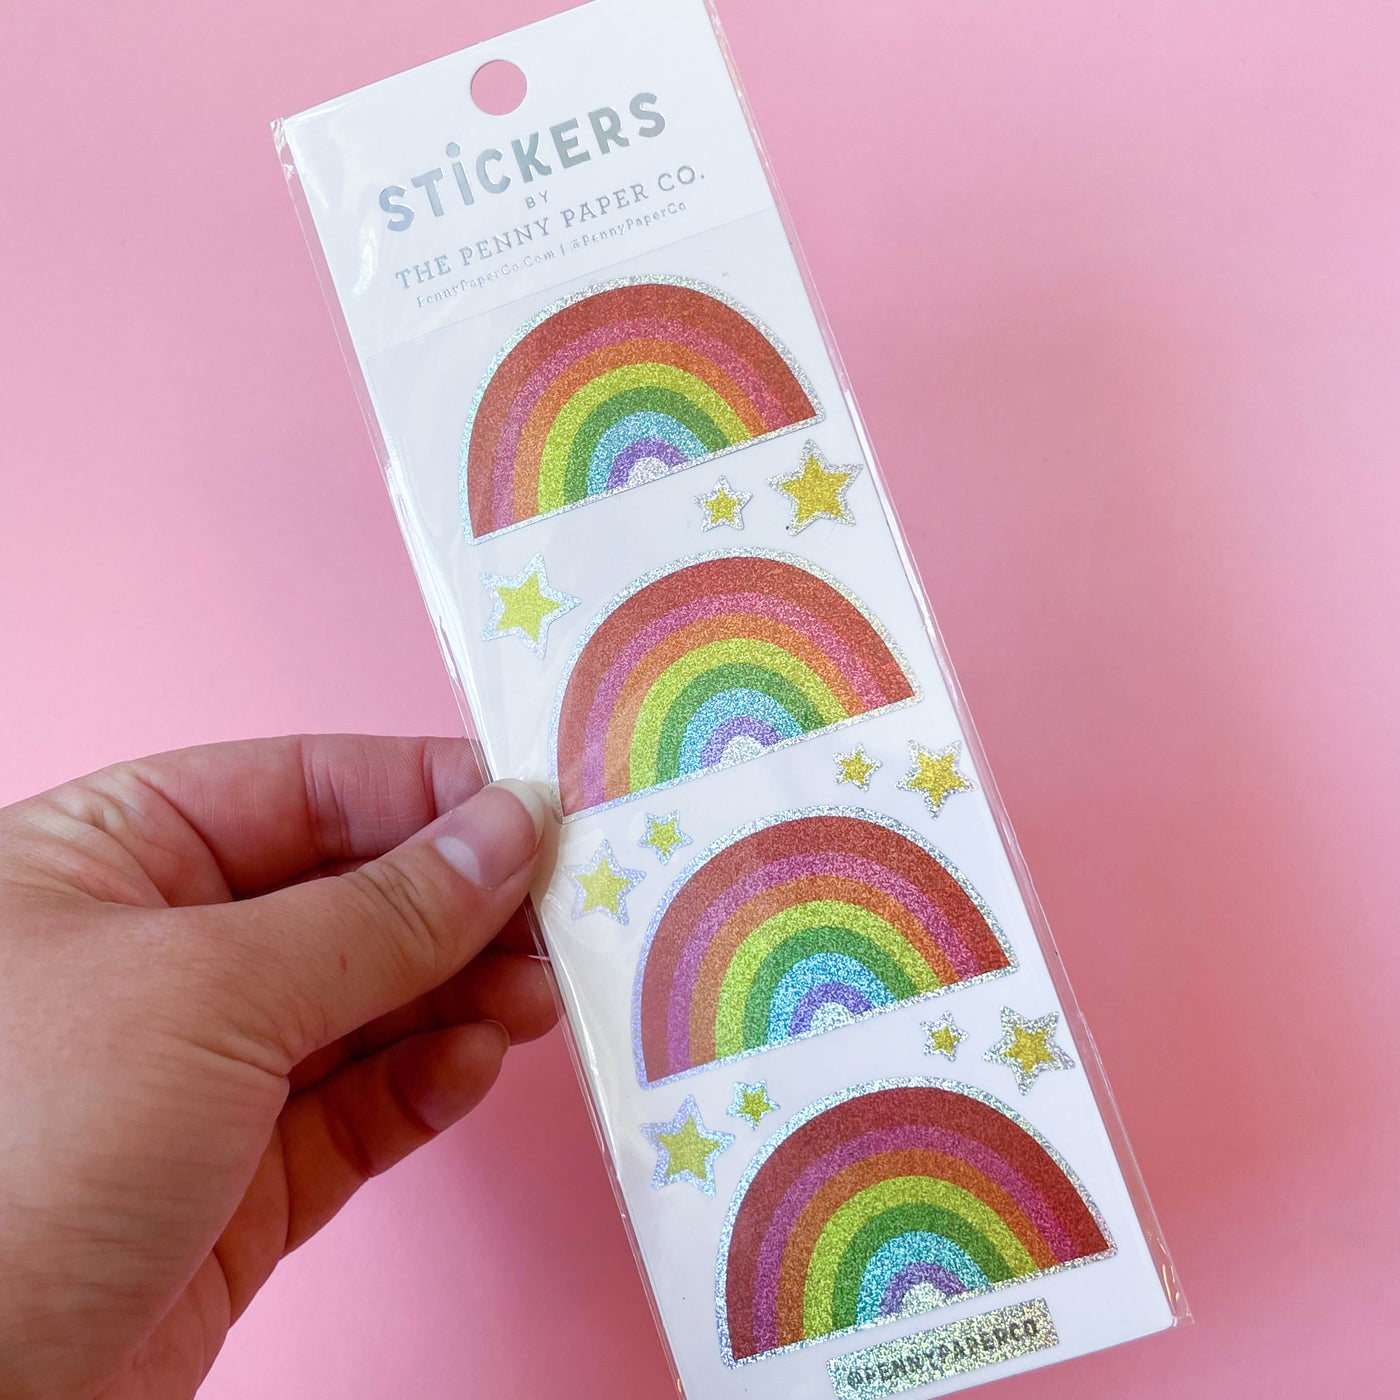 Rainbow Prism Stickers with glittery rainbows from penny paper co